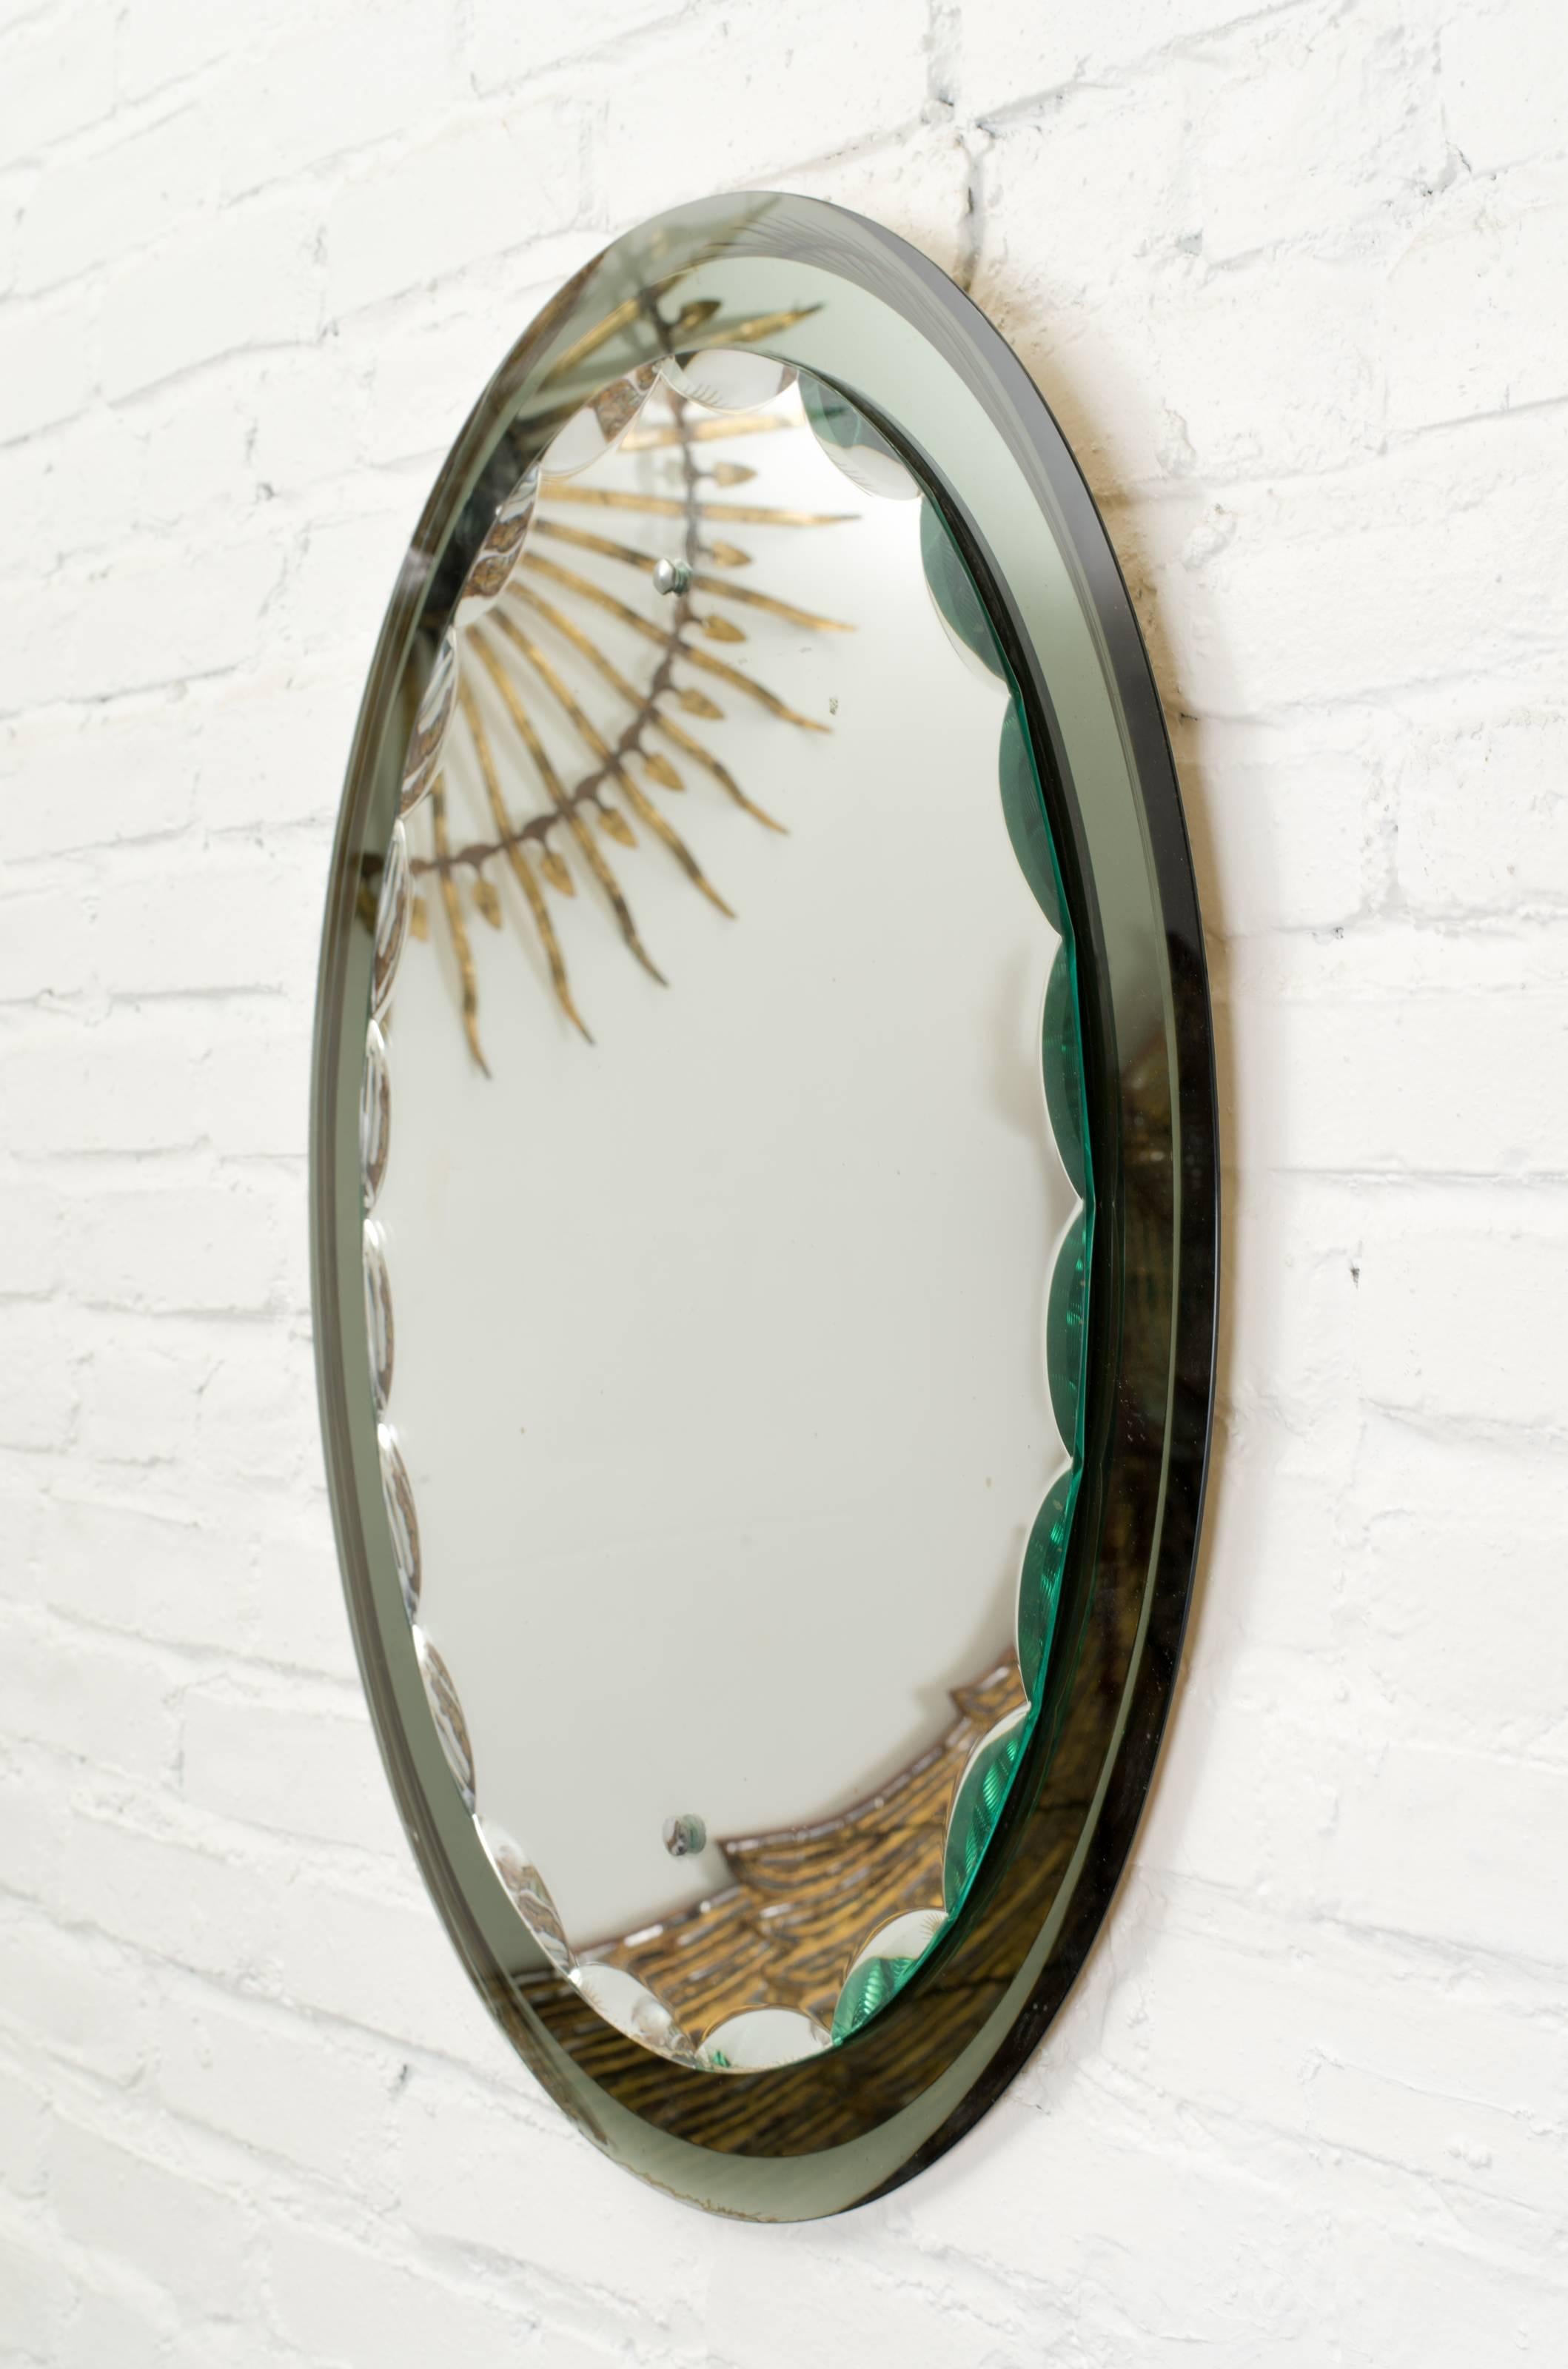 Mirror by Italian maker Cristal Art.
Green glass frame with decorative bevels on the edges of the centre mirror.